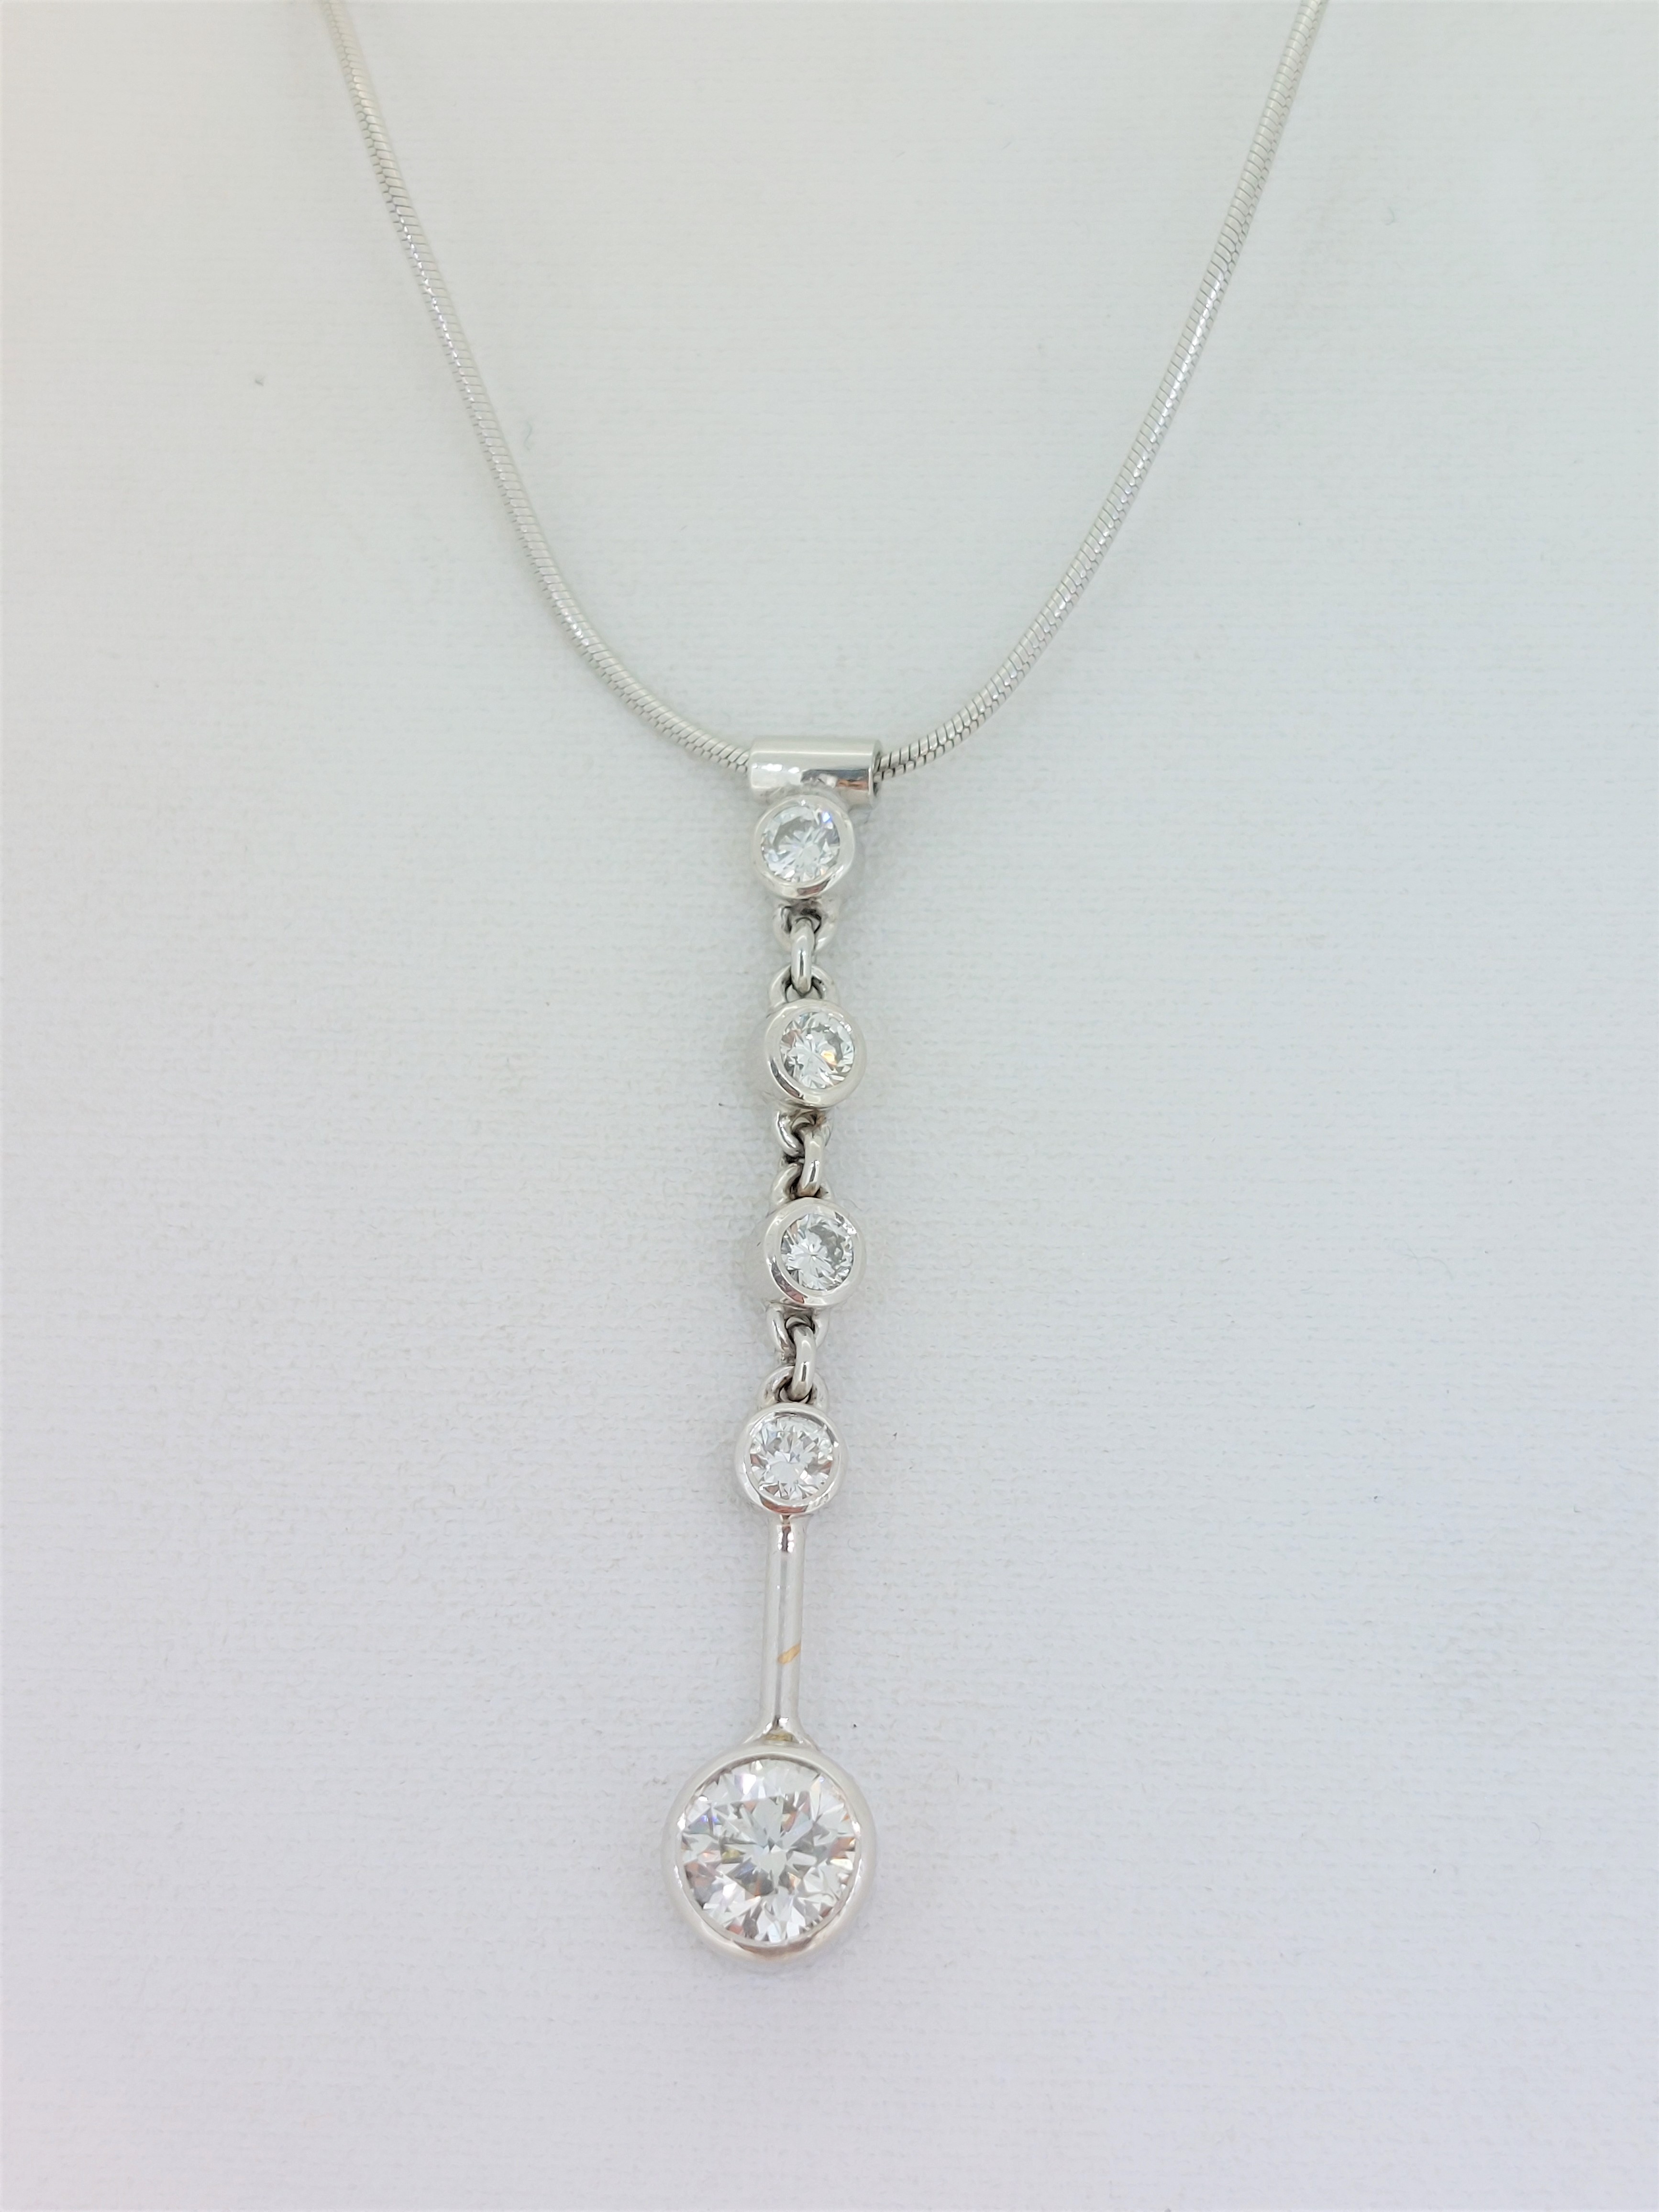 18ct (750) White Gold 0.75ct Diamond Drop Pendant on Snake Chain Necklaces - Image 3 of 5